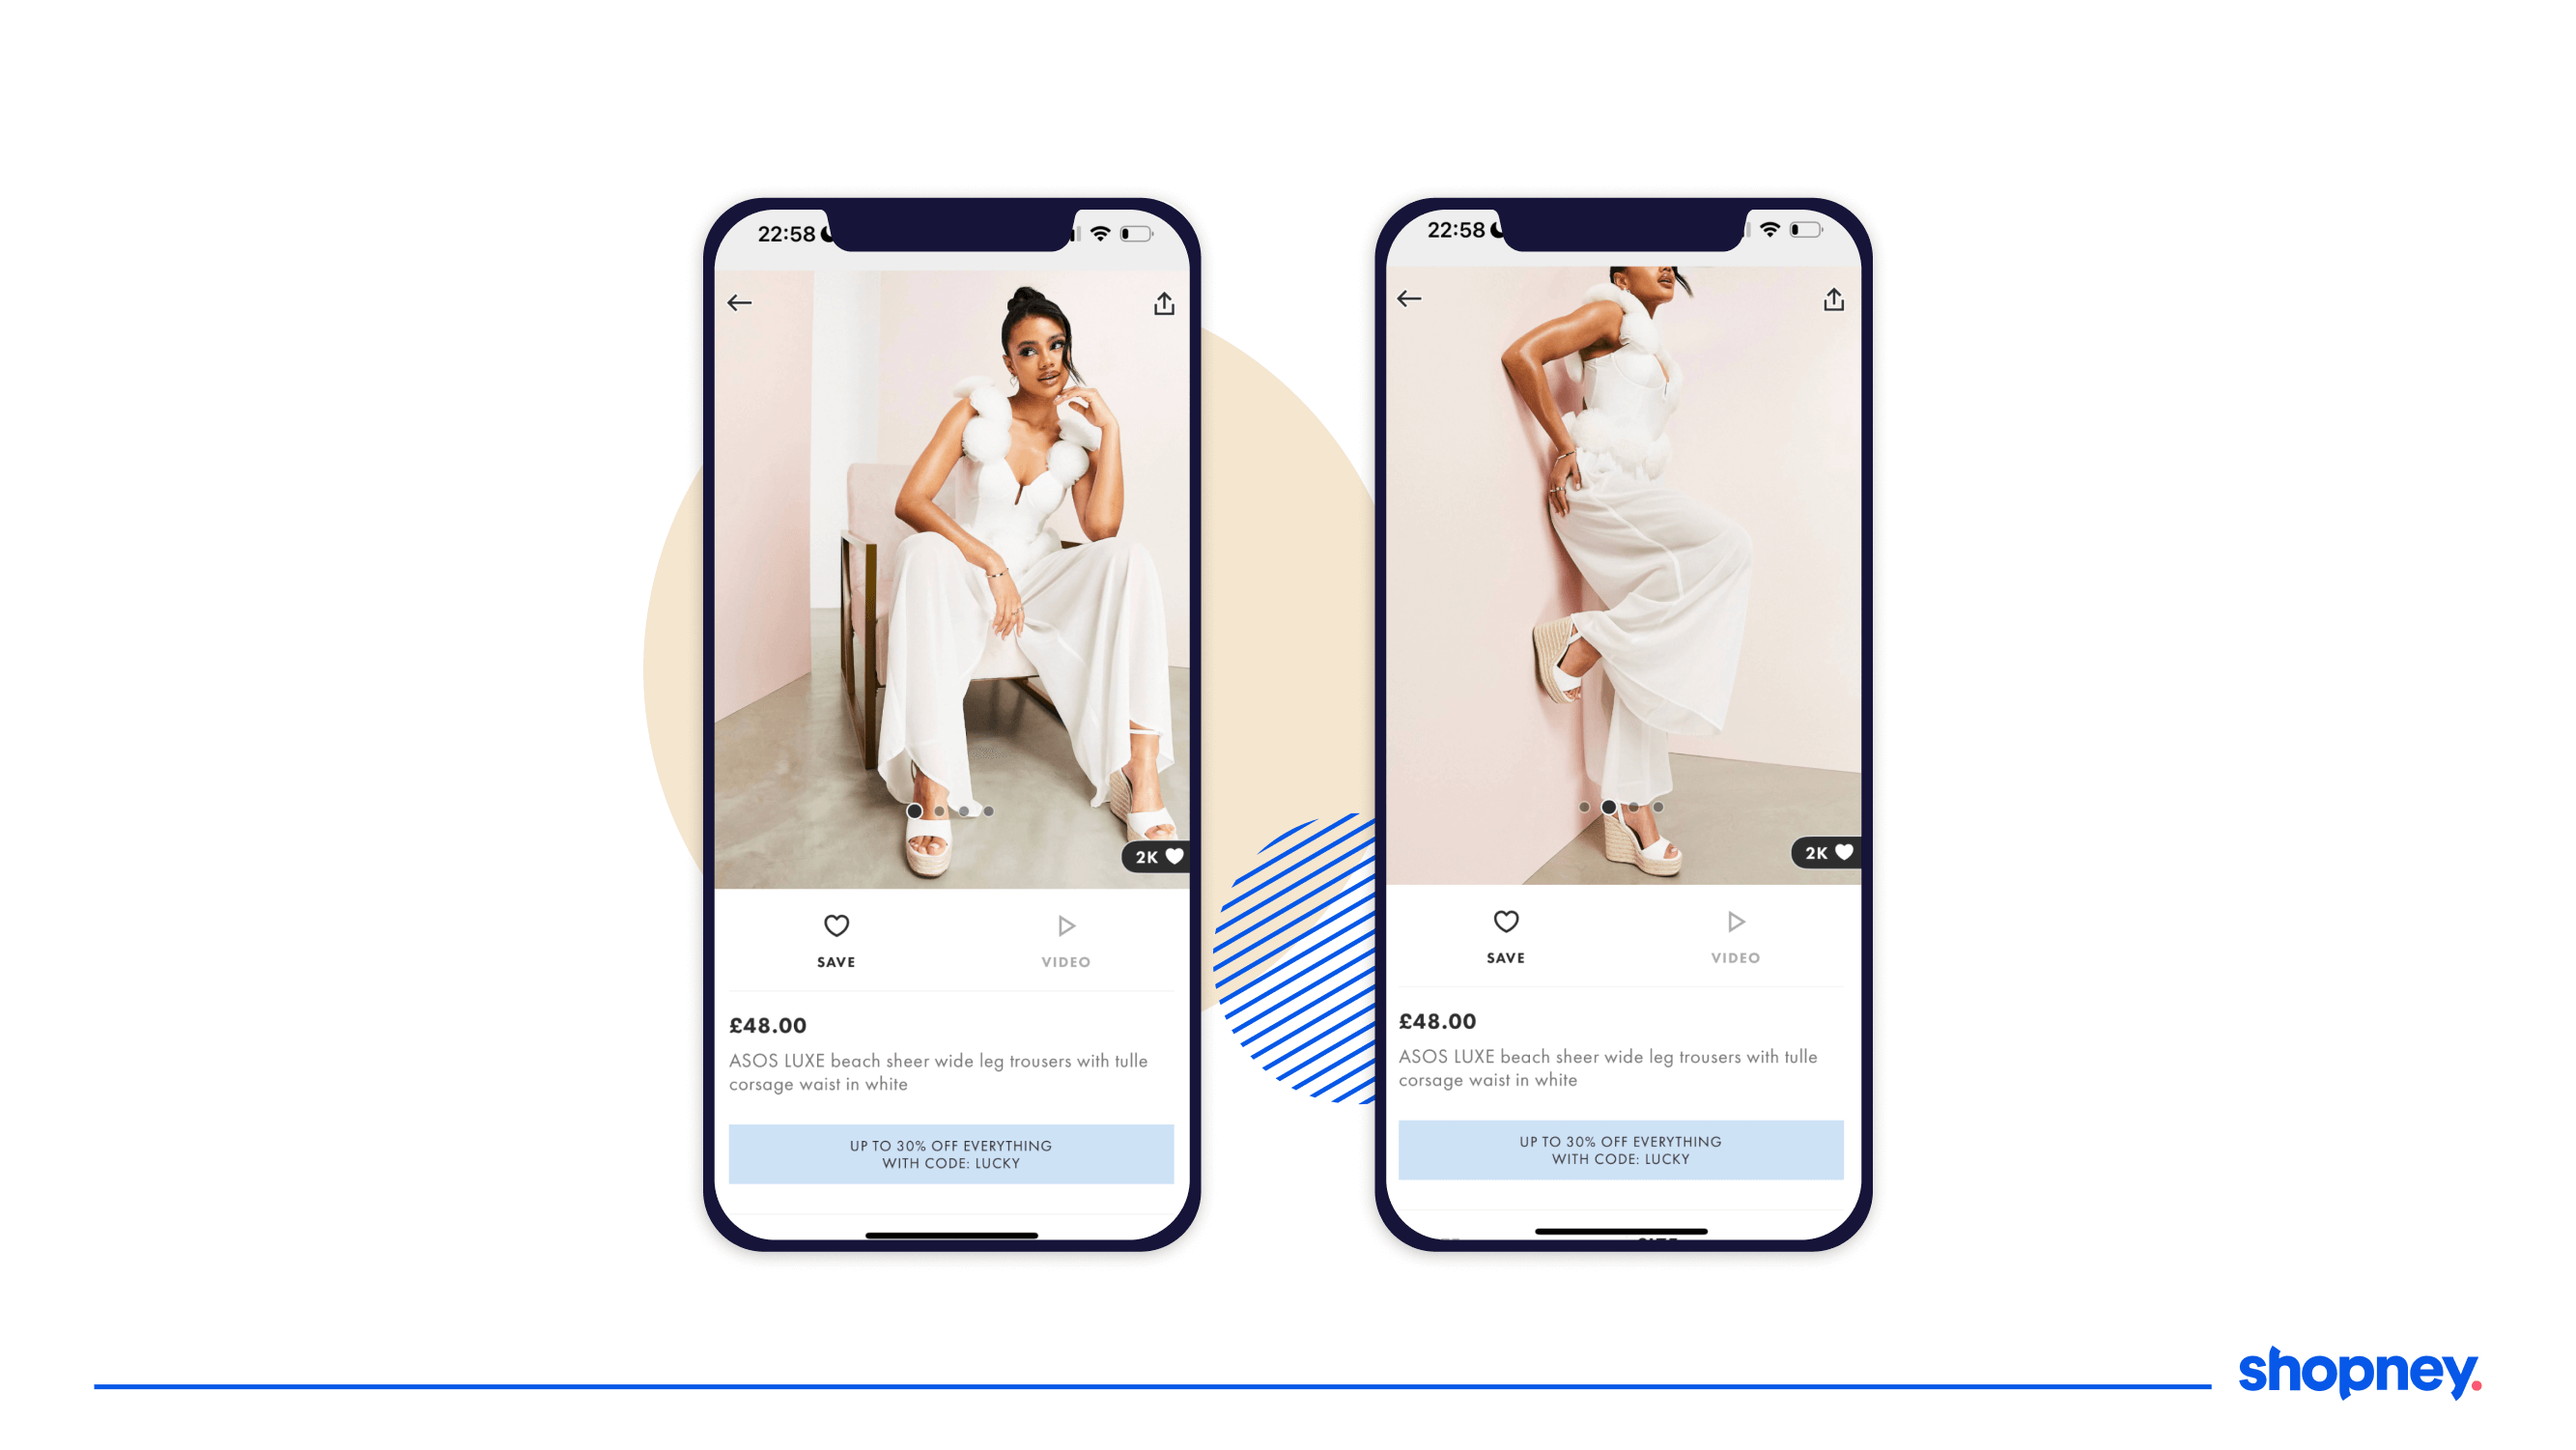 Product images on the mobile app